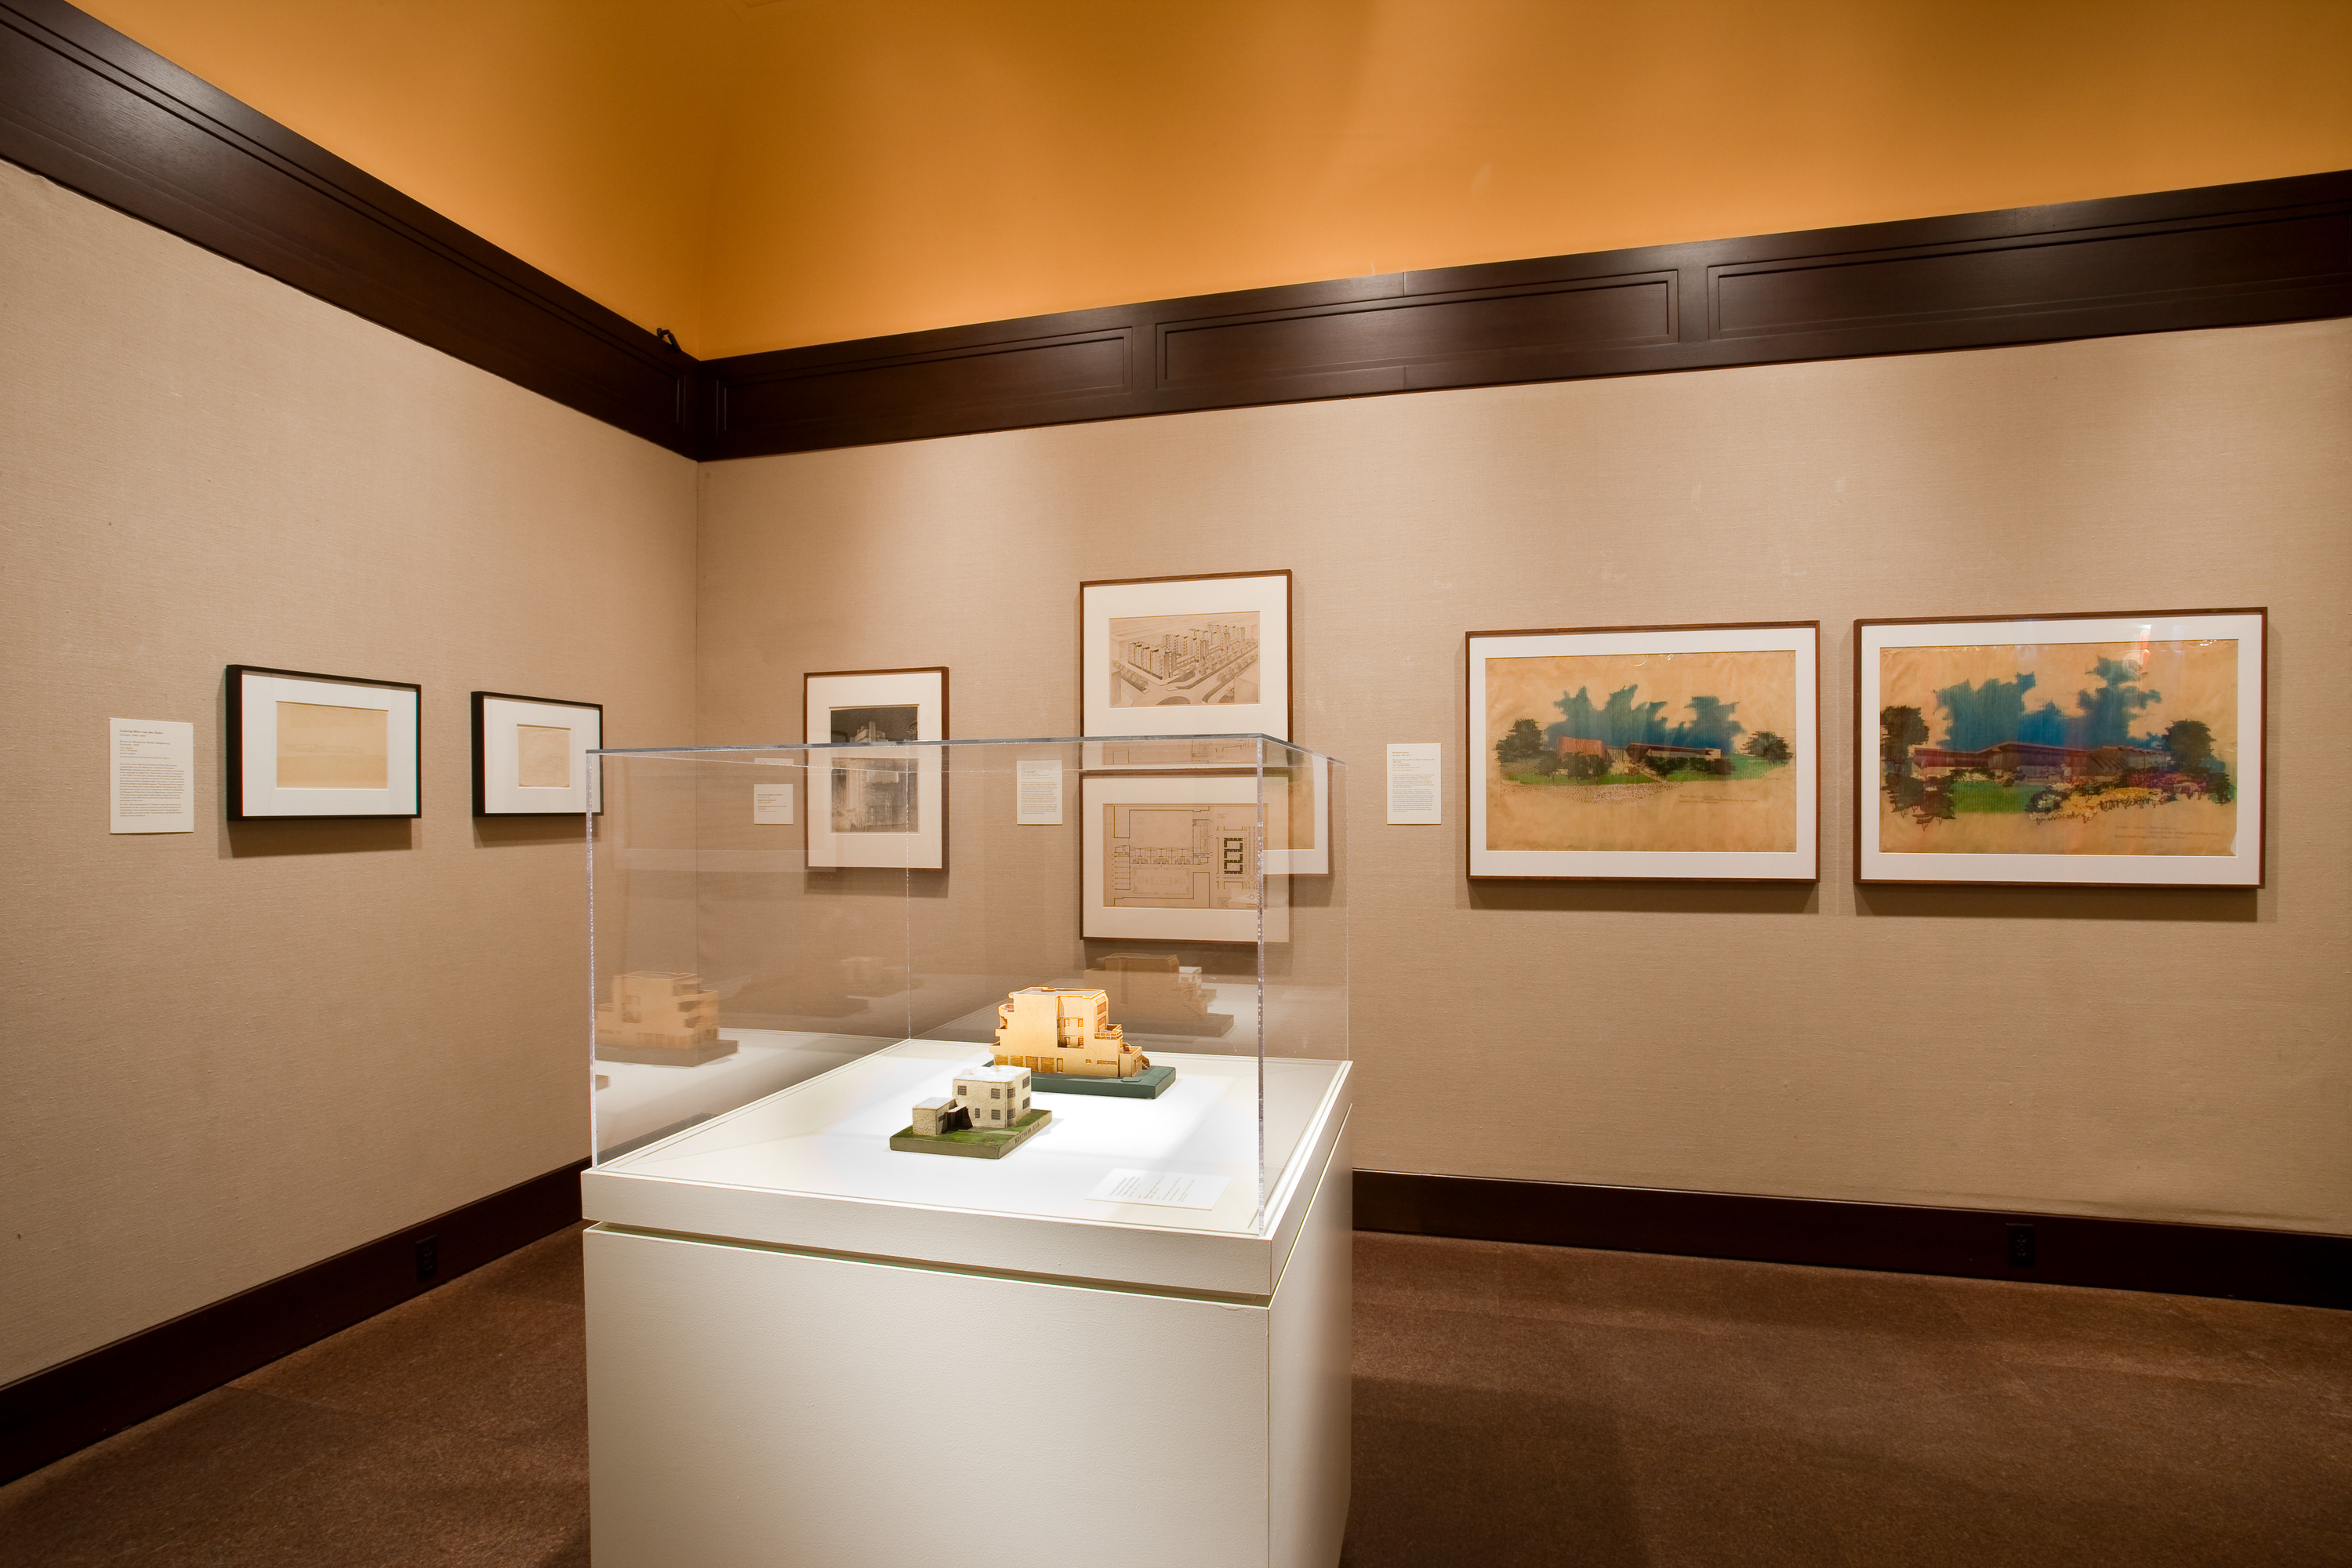 Exhibition view of Imagining Home